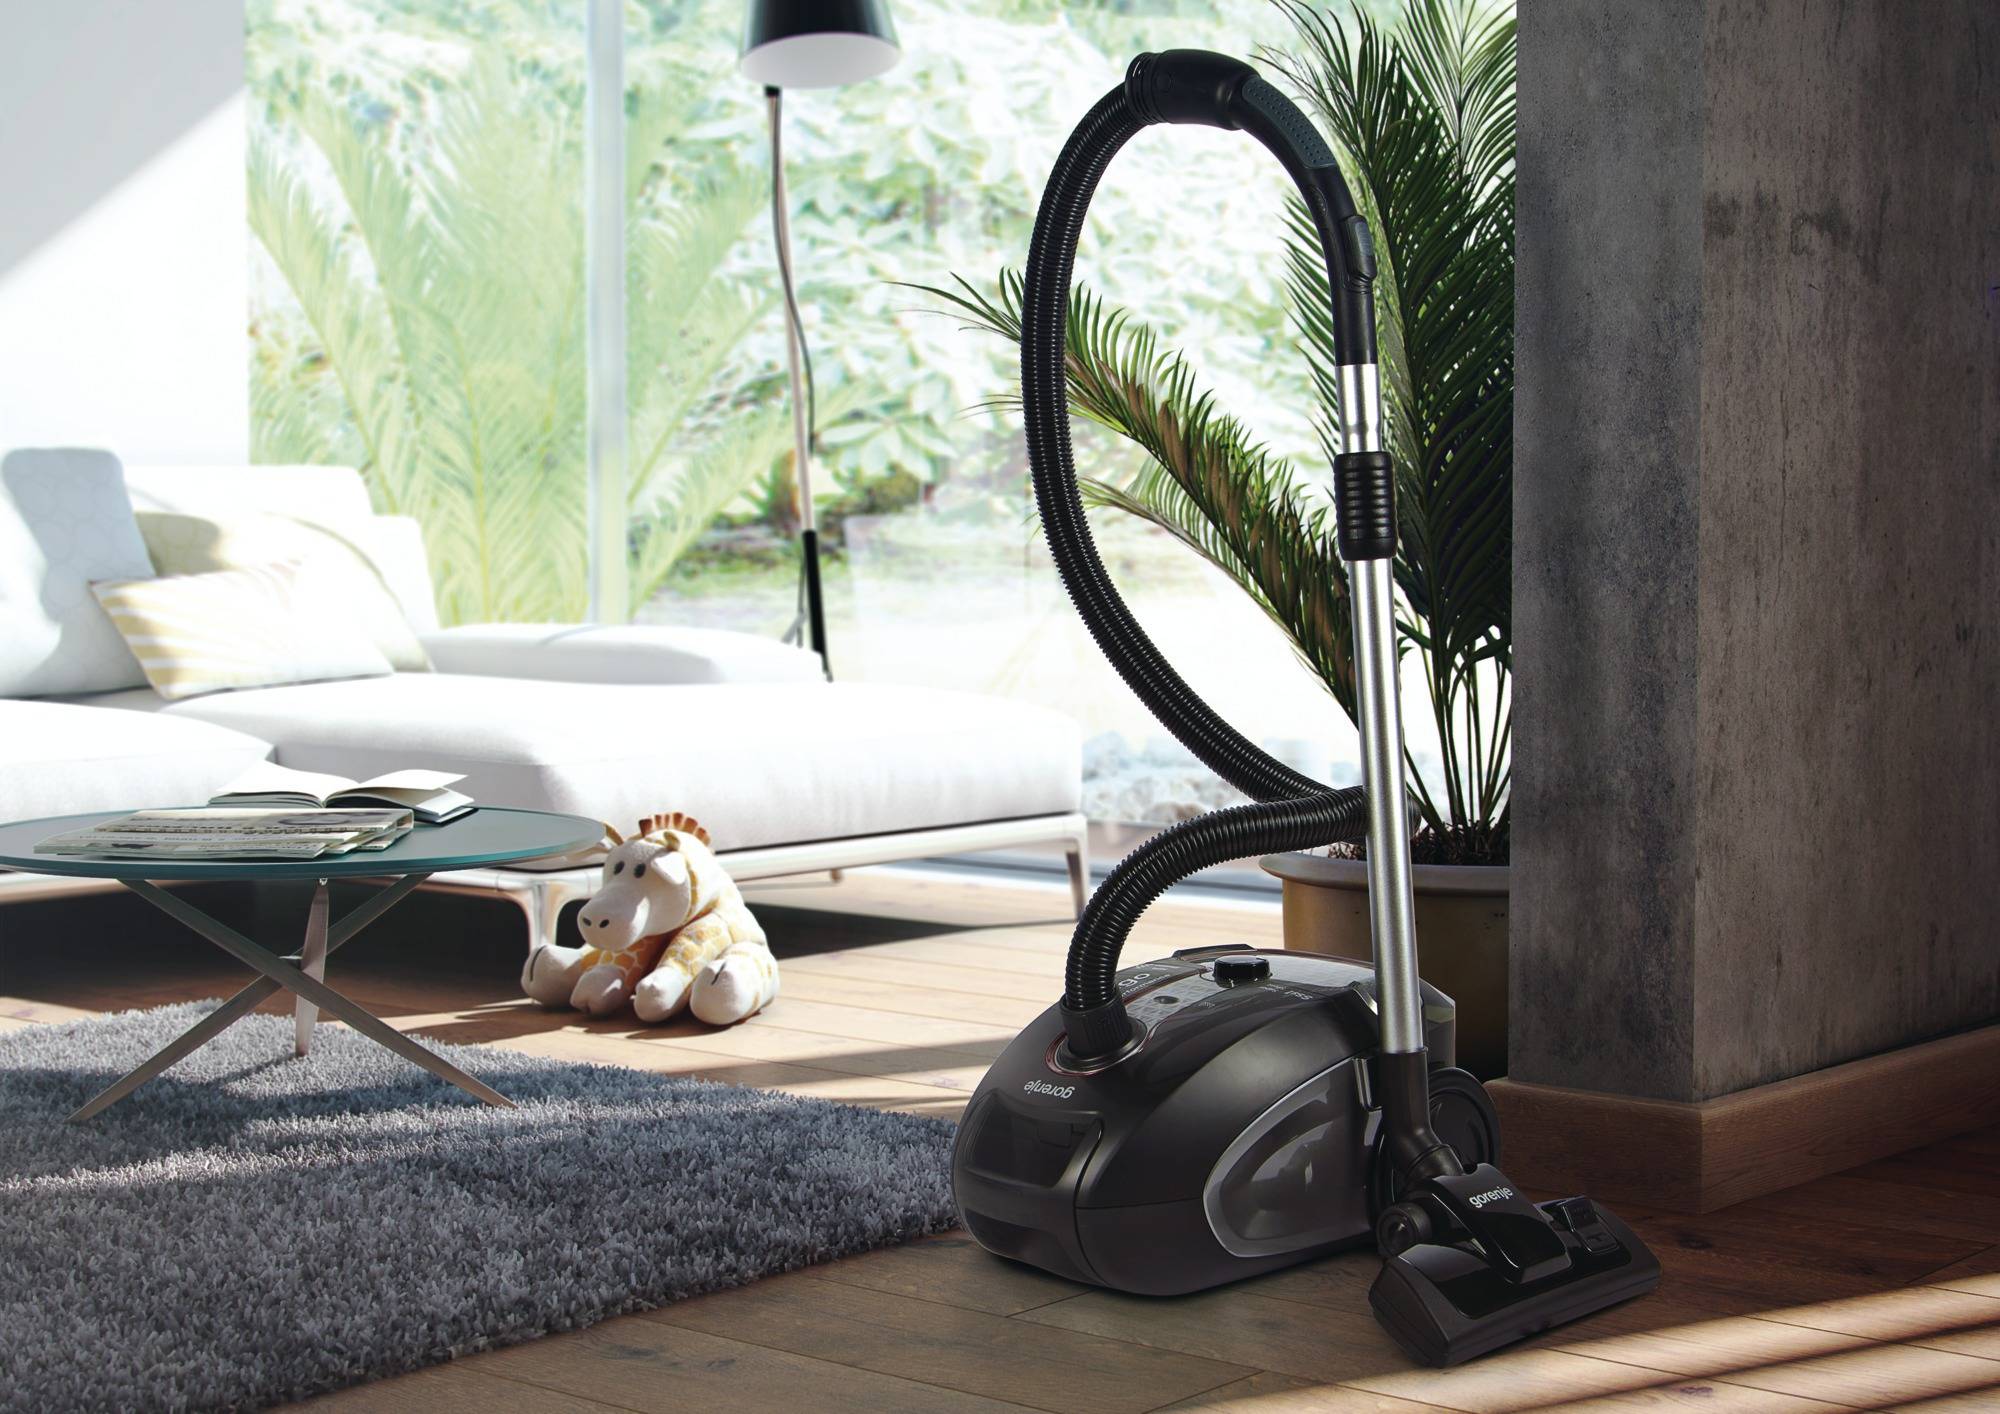 How To Find The Best Vacuum Cleaner For Your Home